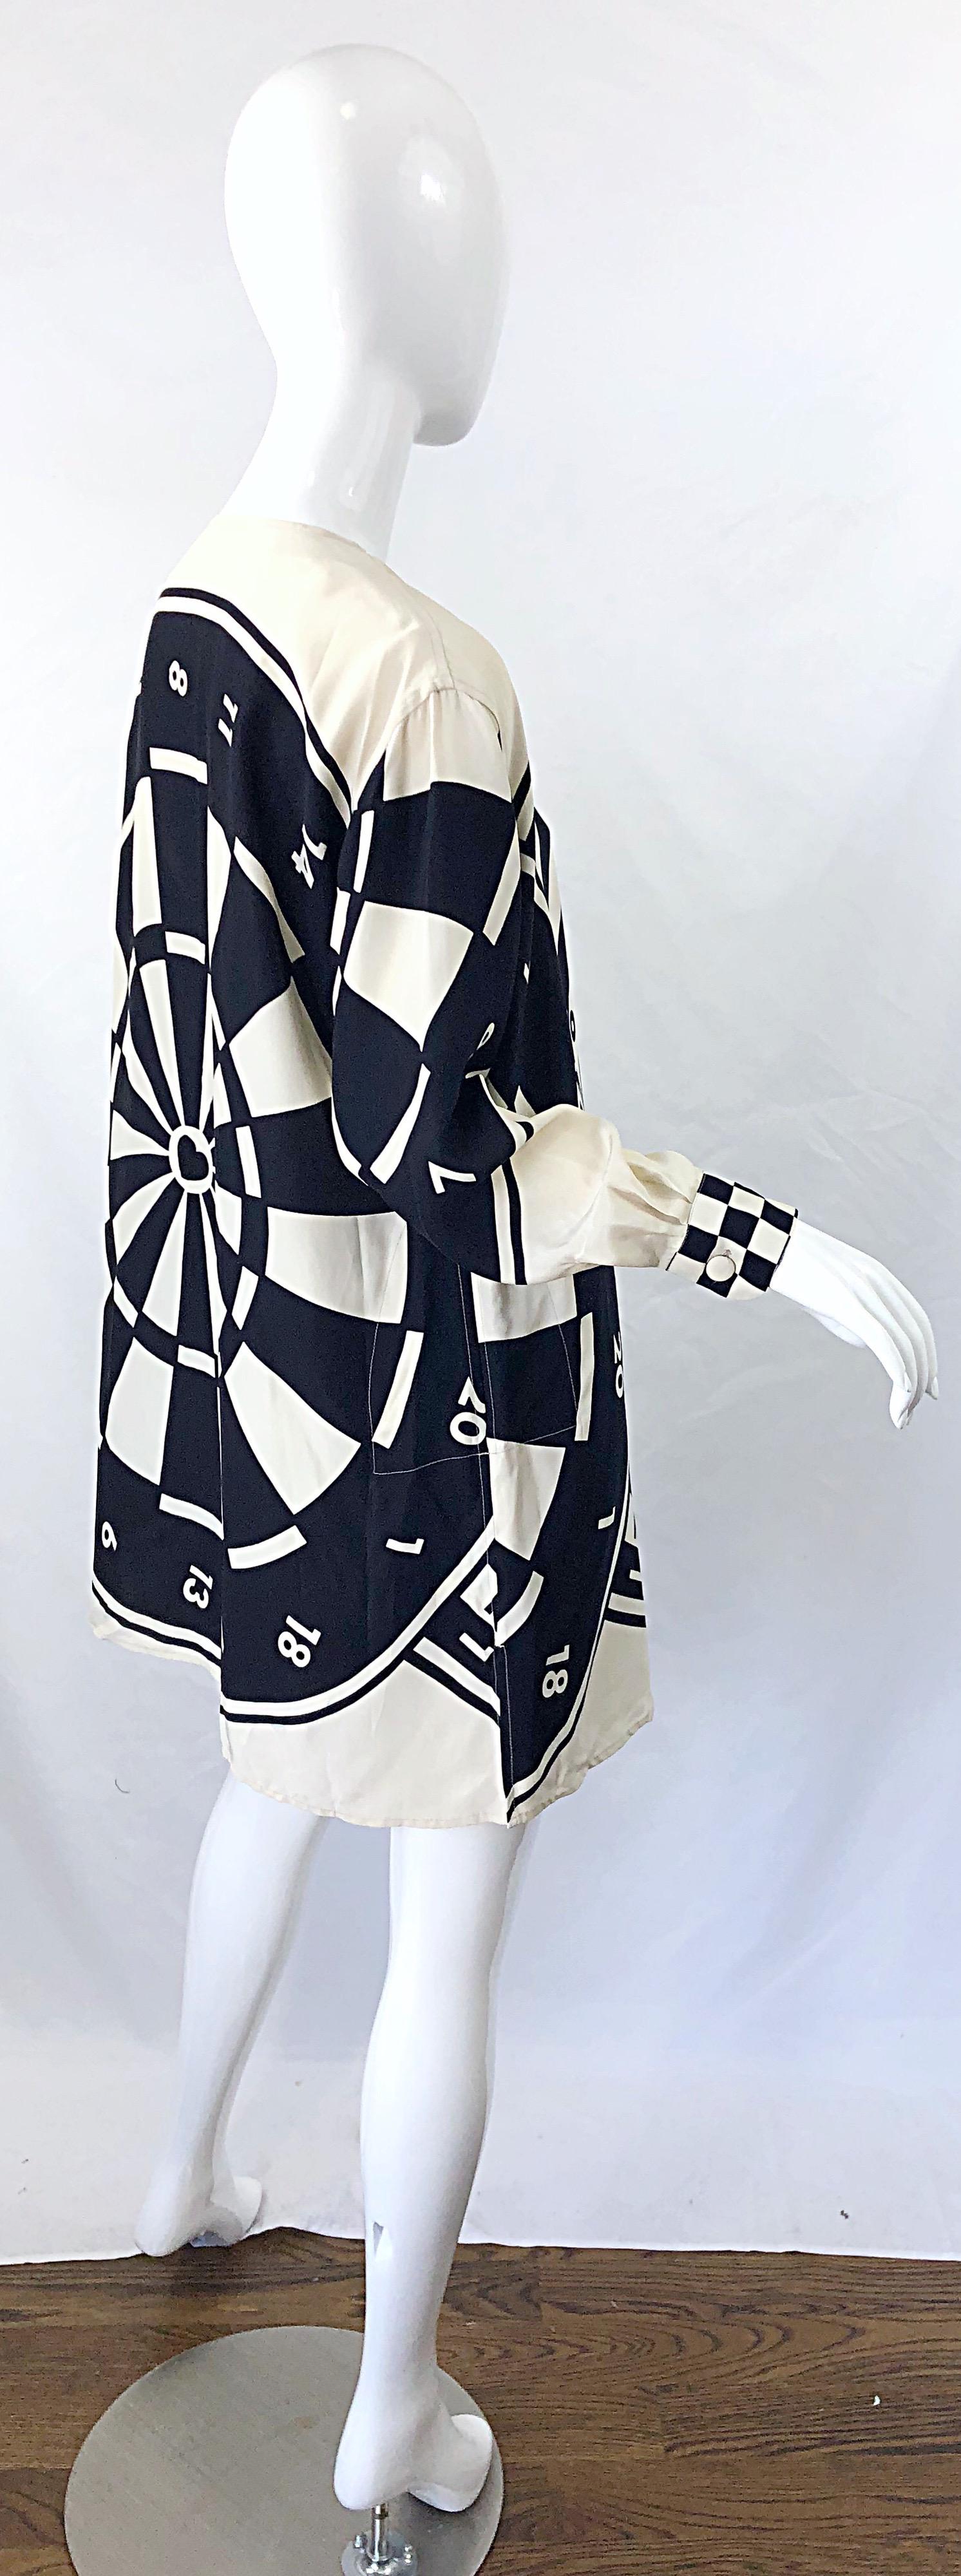 1980s Moschino Cheap & Chic Bullseye Black and White Size 8 Vintage Tunic Dress For Sale 6